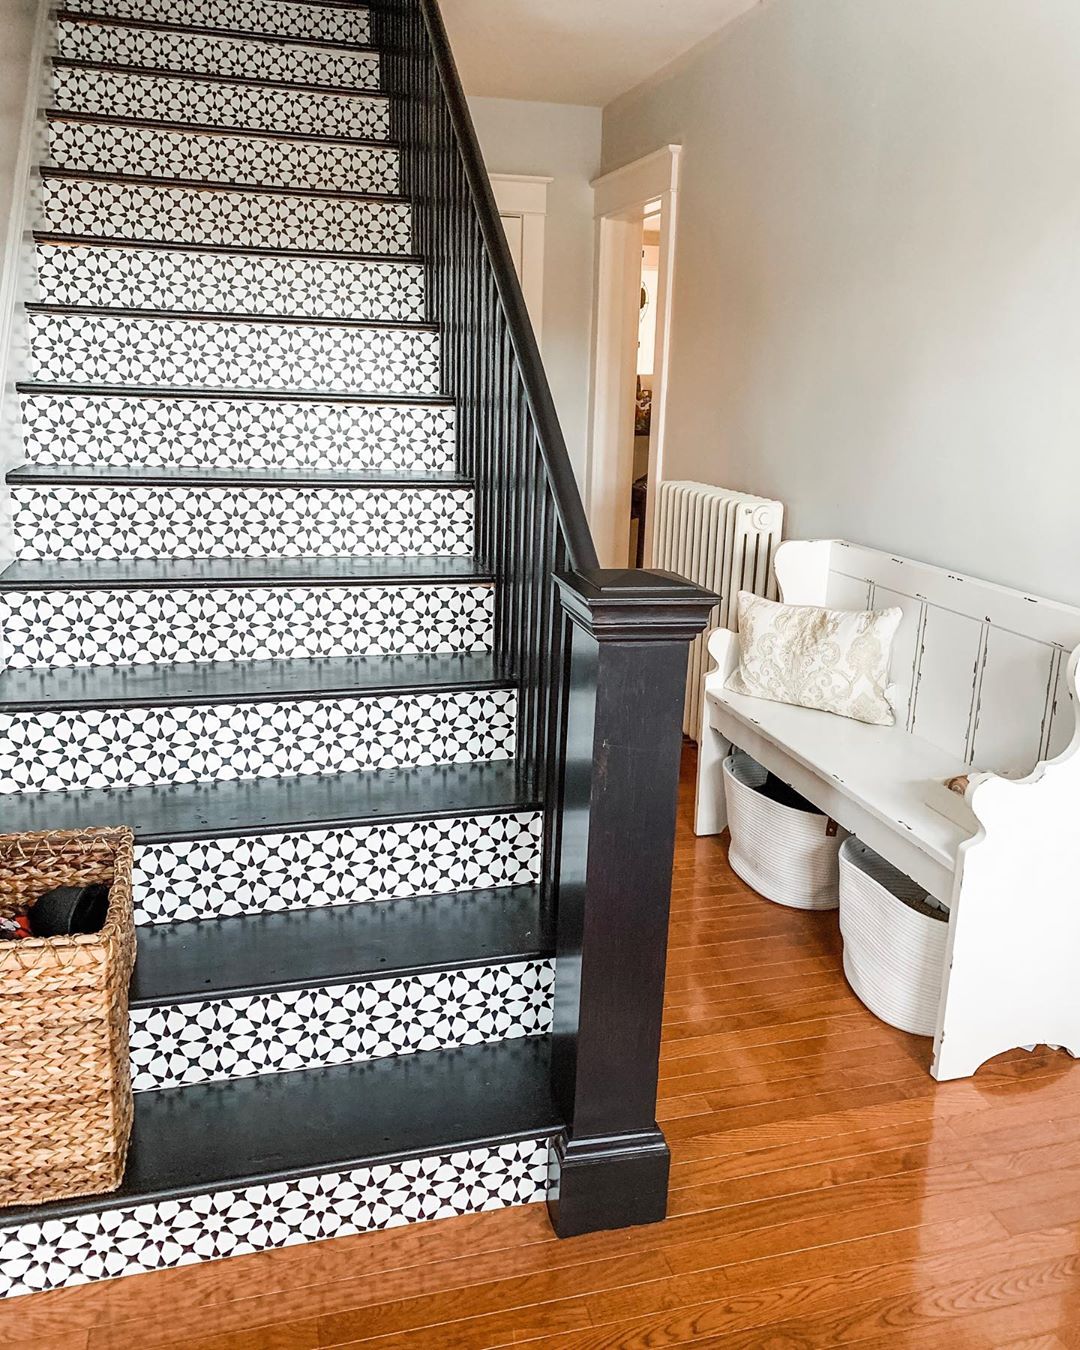 home staircase with black balusters and knule post and wallpaper installed on stairs photo by Instagram user @chasingquinndesign